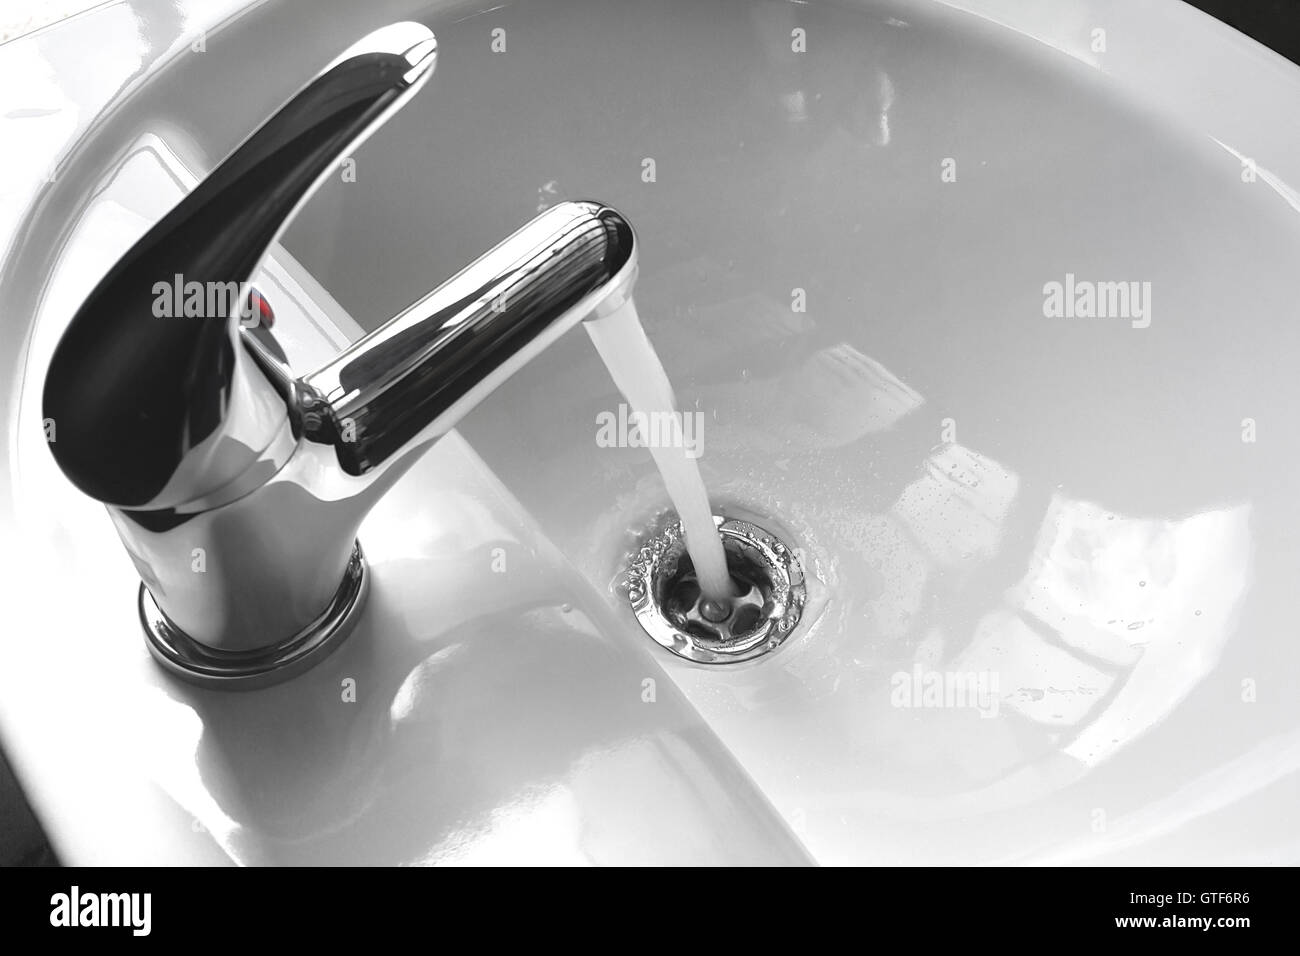 Water tap faucet with flowing water in a white bathroom sink. Stock Photo